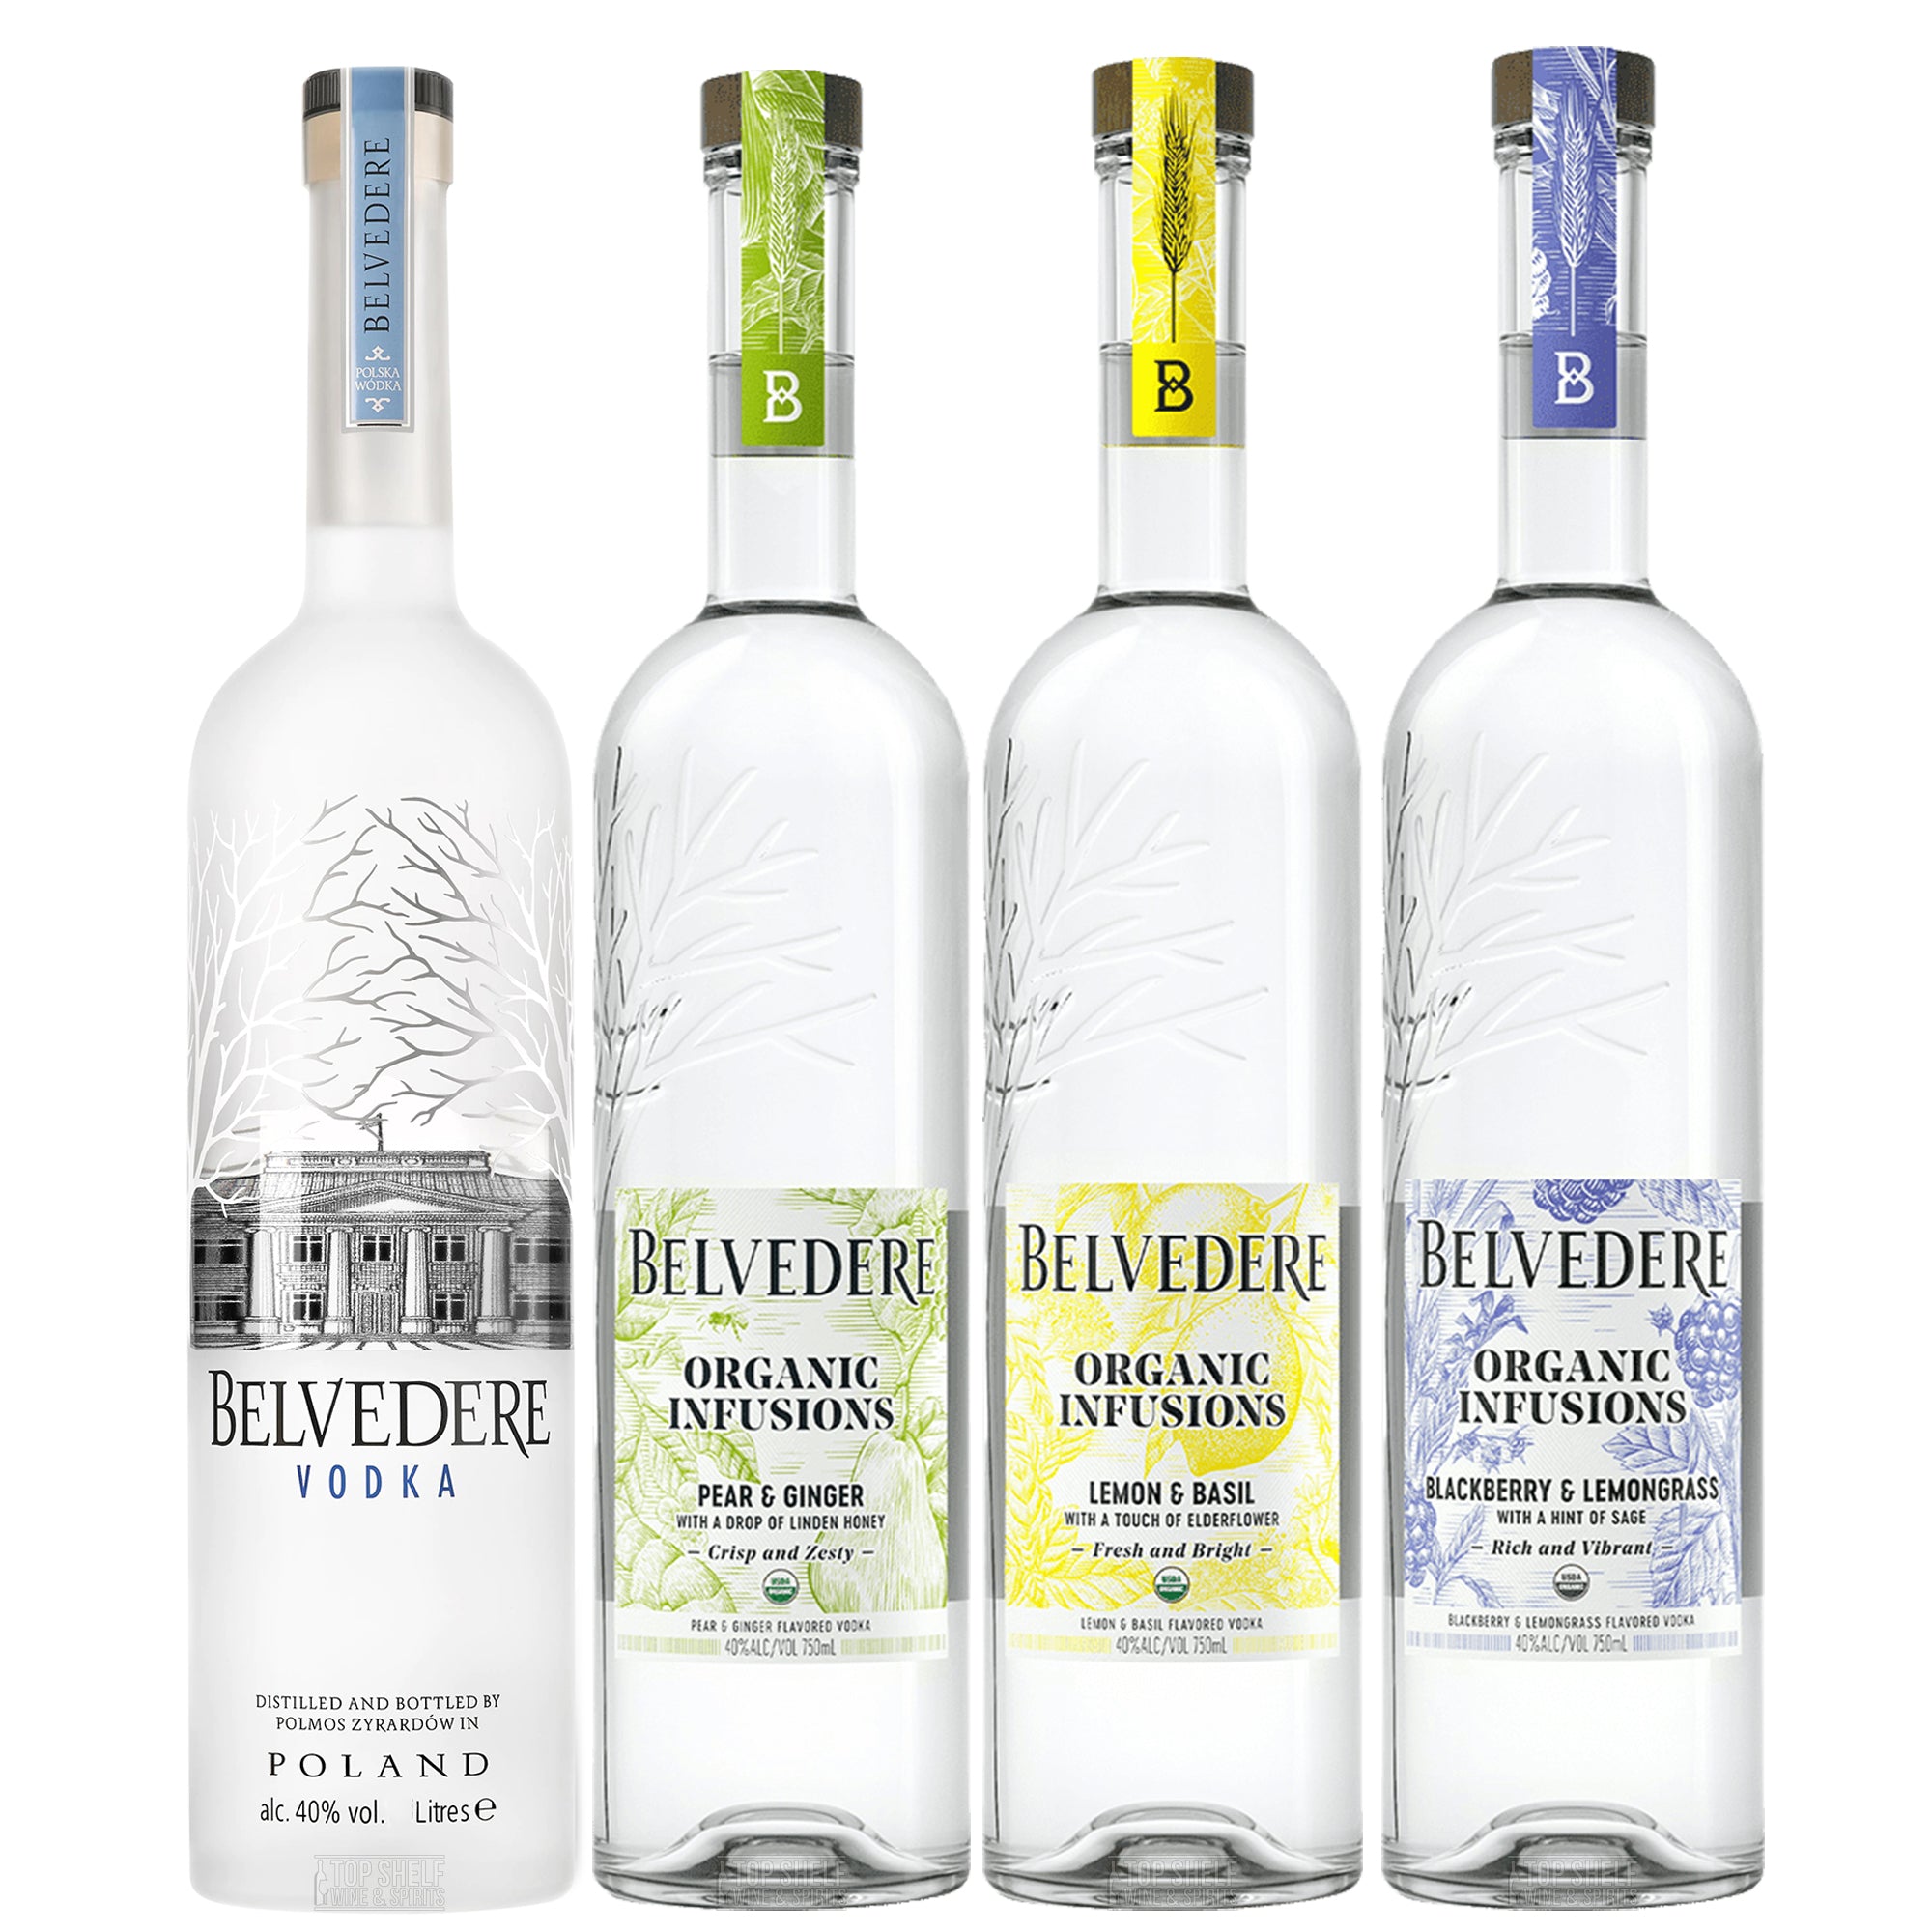 Belvedere Organic Infusions Pear and Ginger Vodka - Litre - Spirits from  The Whisky World UK